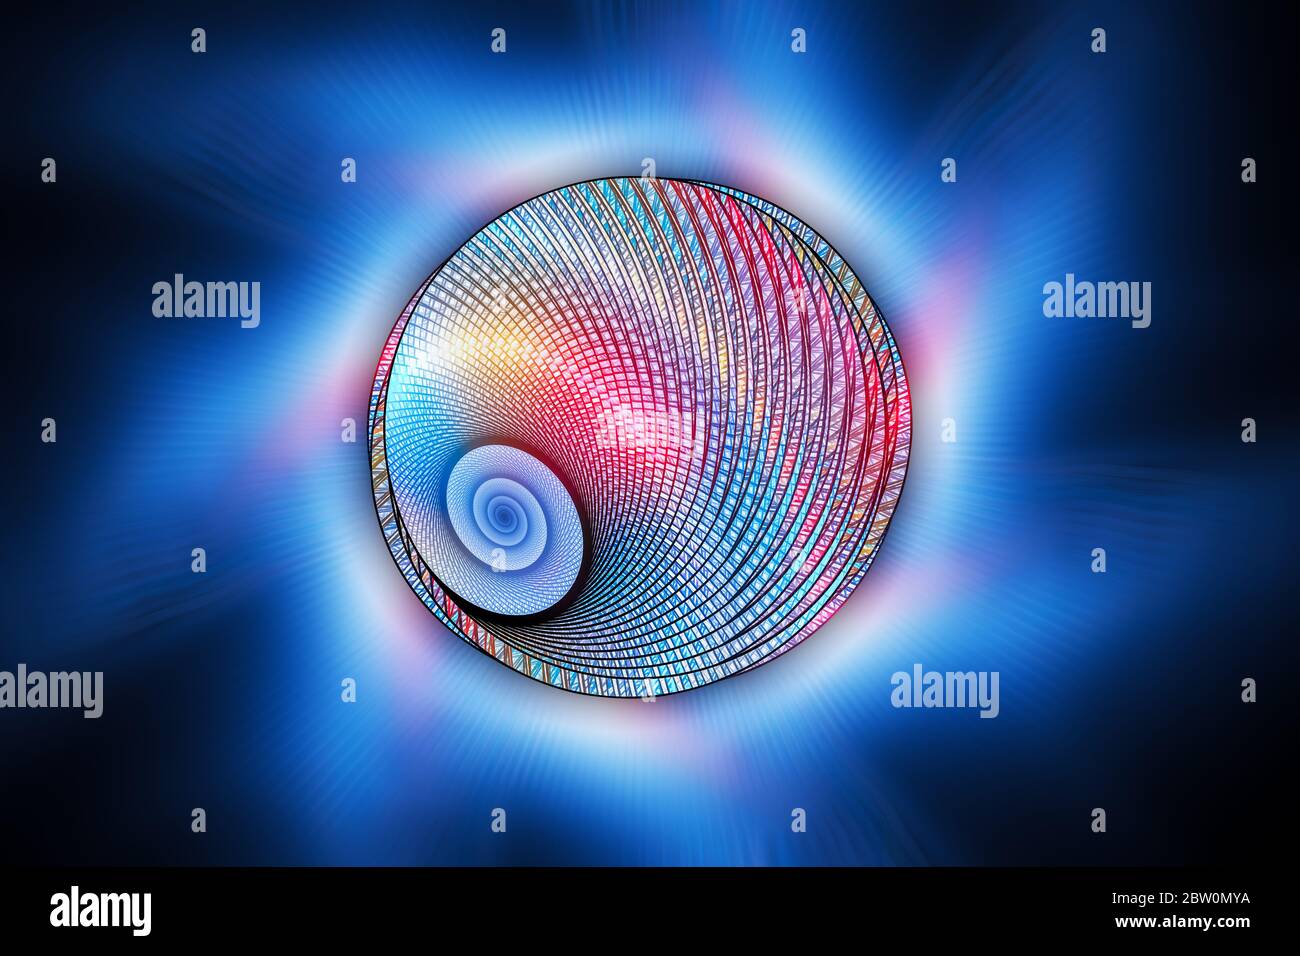 Colorful spiral fractal with glowing spinning corona, computer generated abstract background, 3D rendering Stock Photo